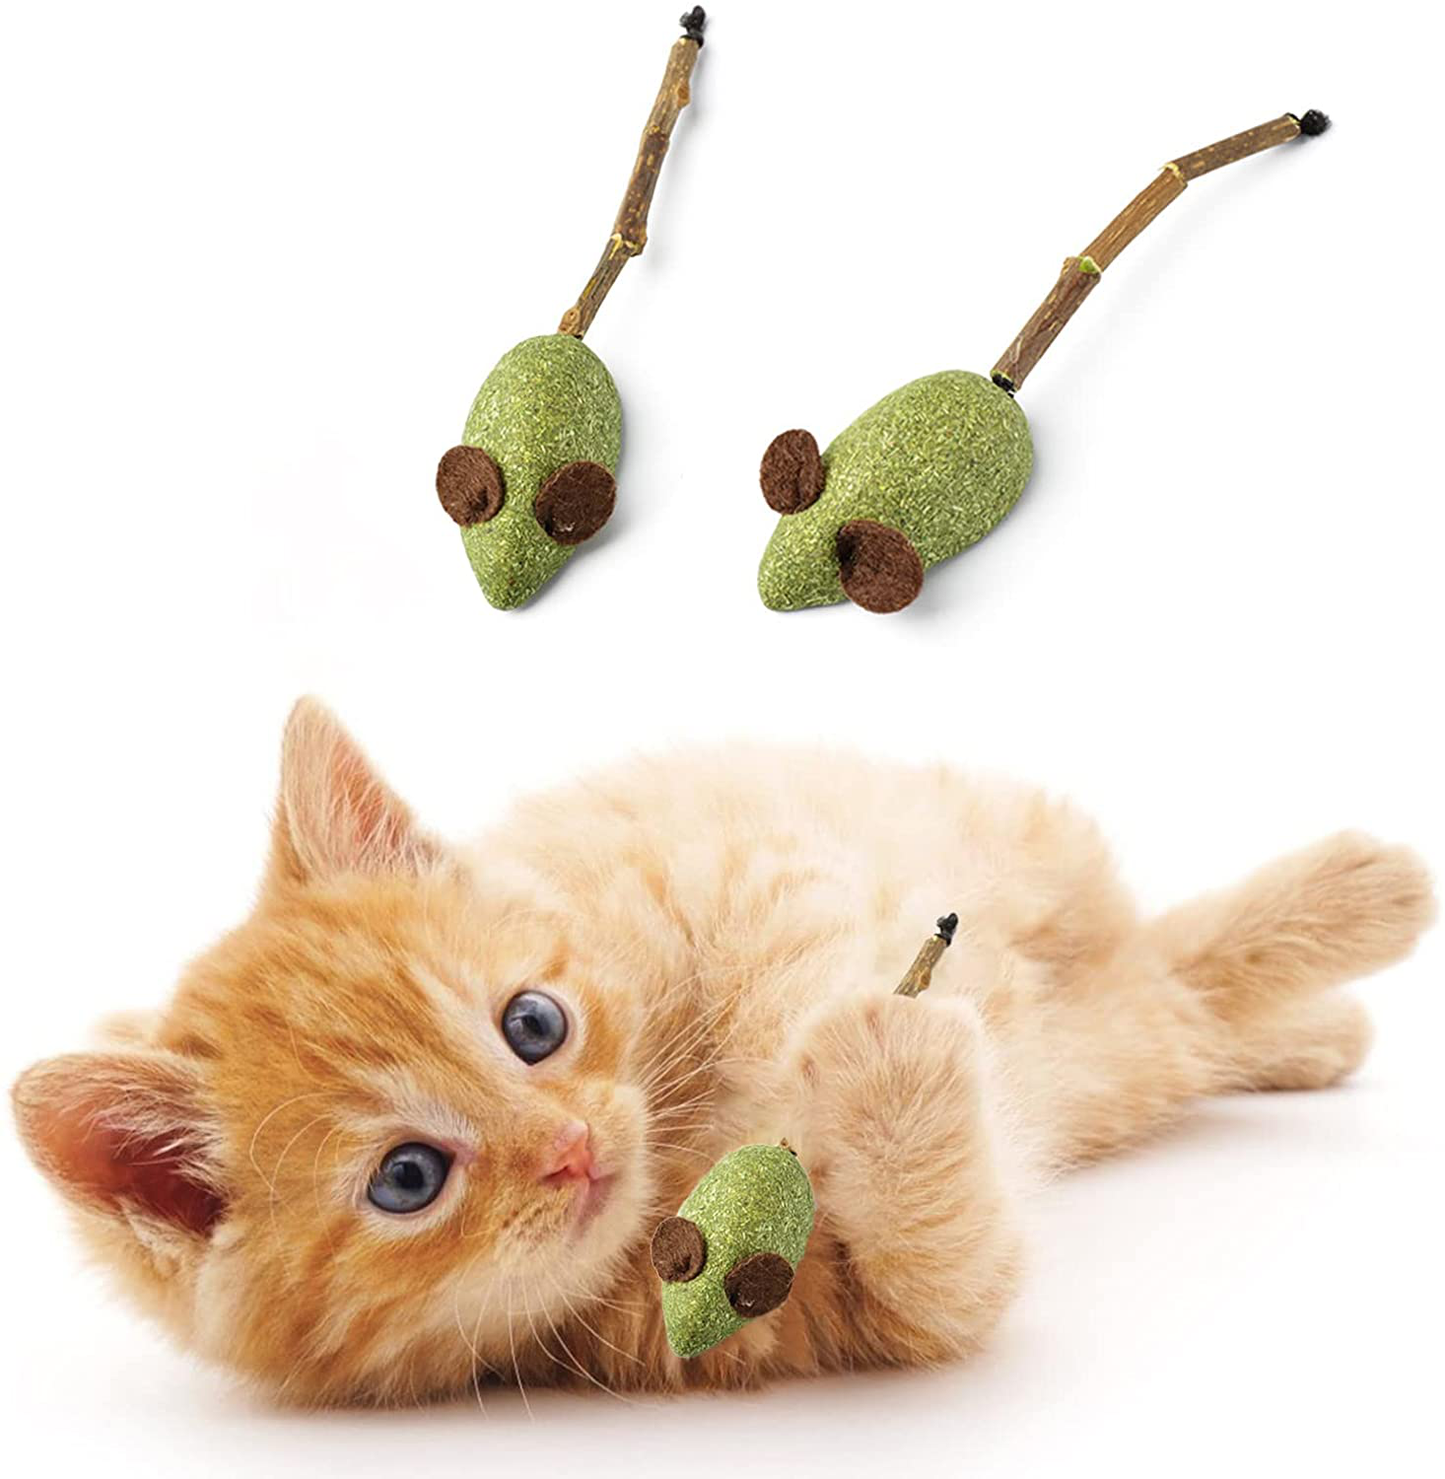 Catnip Toy Cat Toy Indoor，Cat Chewing Natural Silvervine Sticks for Cats，Make the Cat Happy Cat Kick Interactive,Teeth Cleaning Edible Natural to Promote Cat'S Appetite，Natural Catnip Mouse Cat Toy